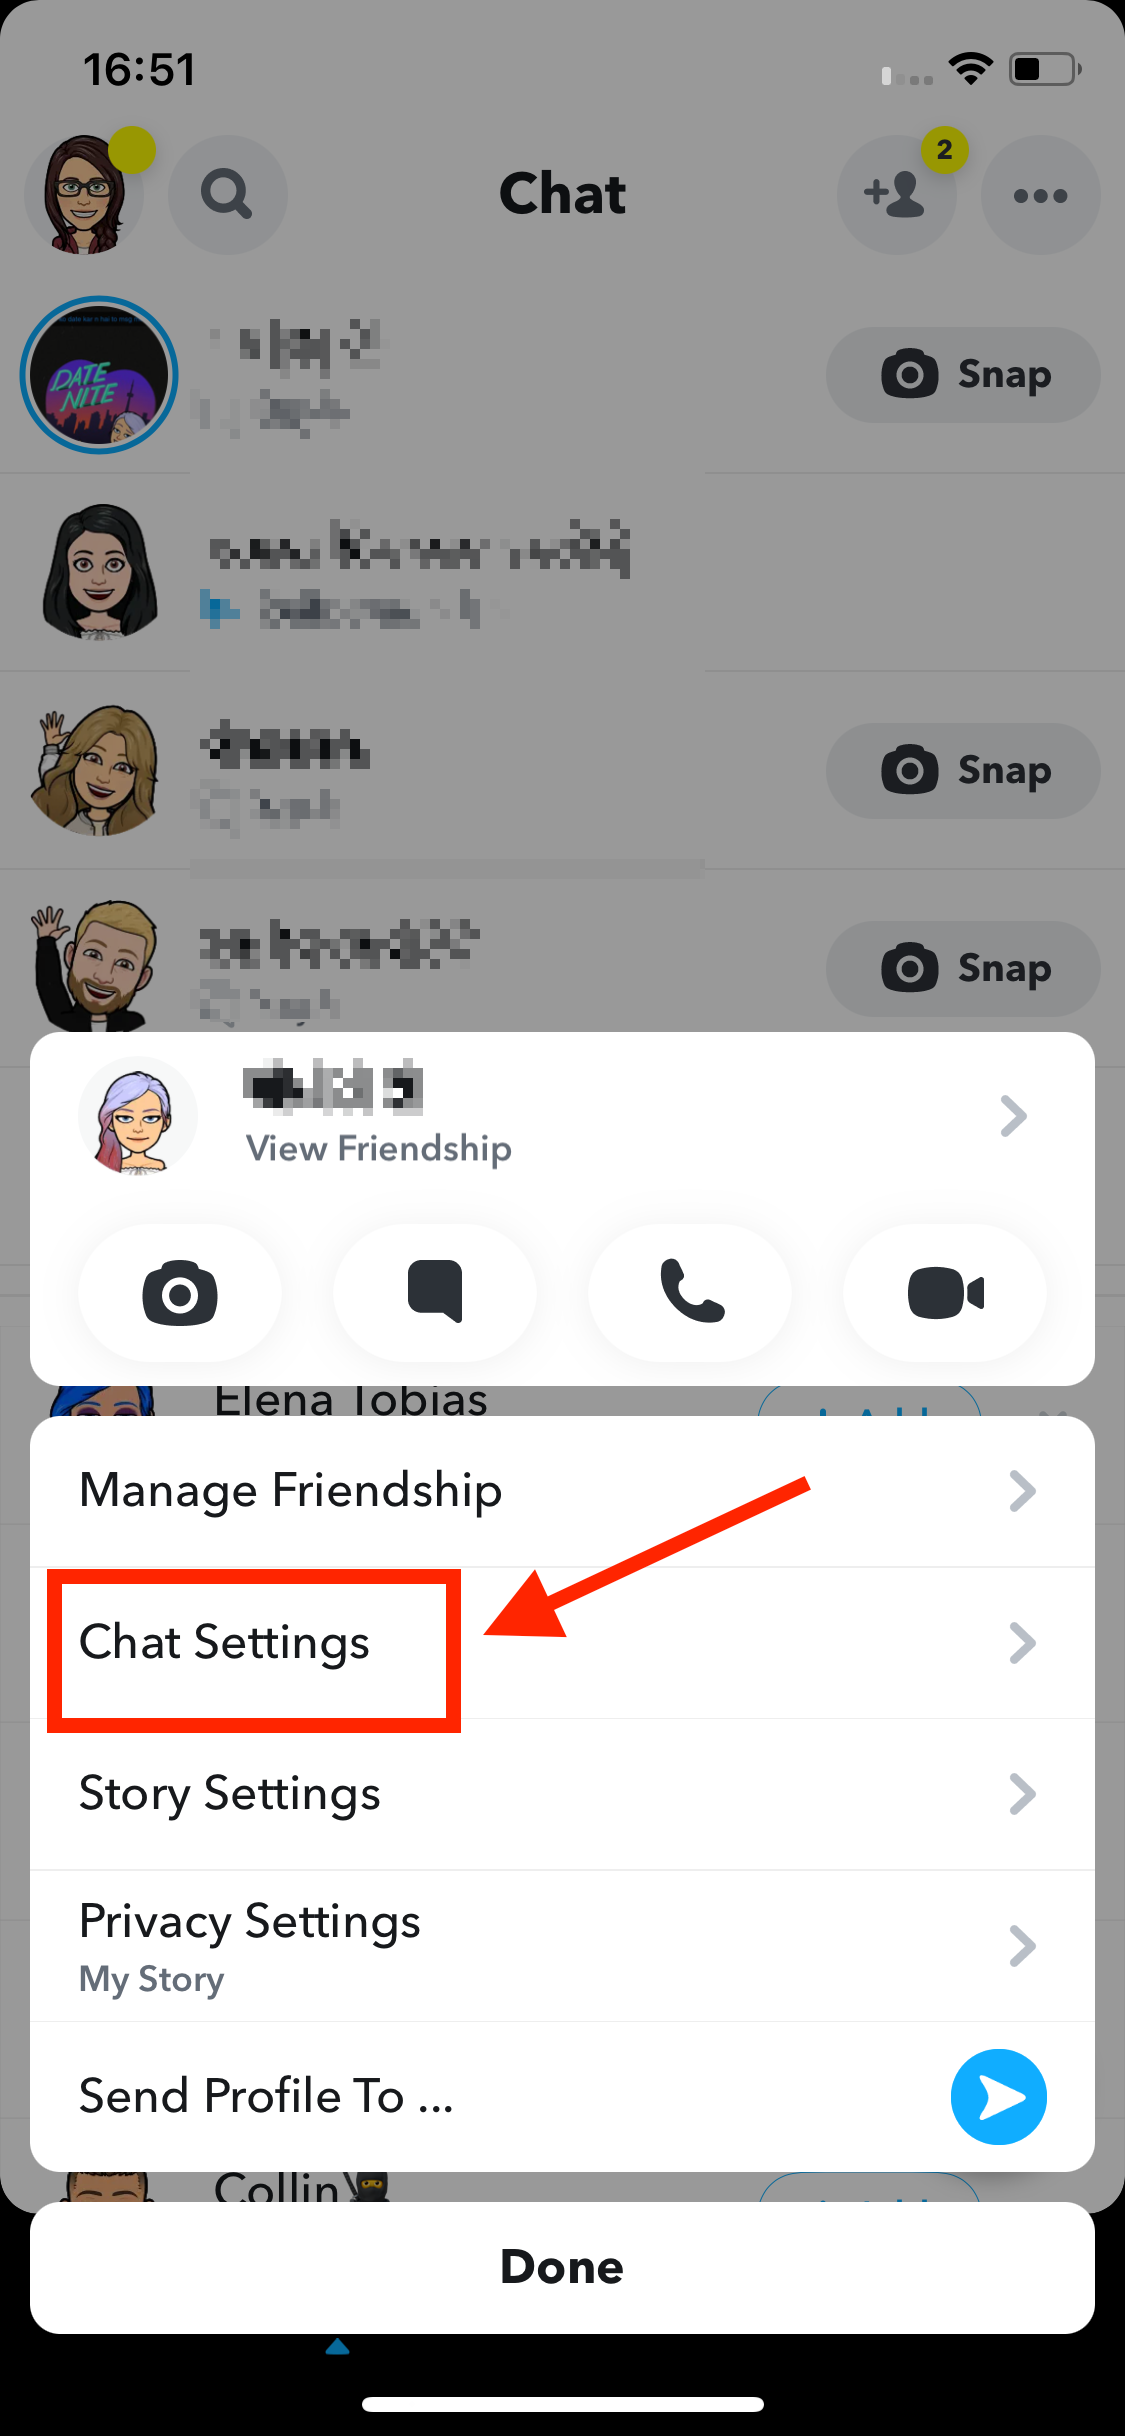 Long-press on a chat and tap 'Chat Settings'